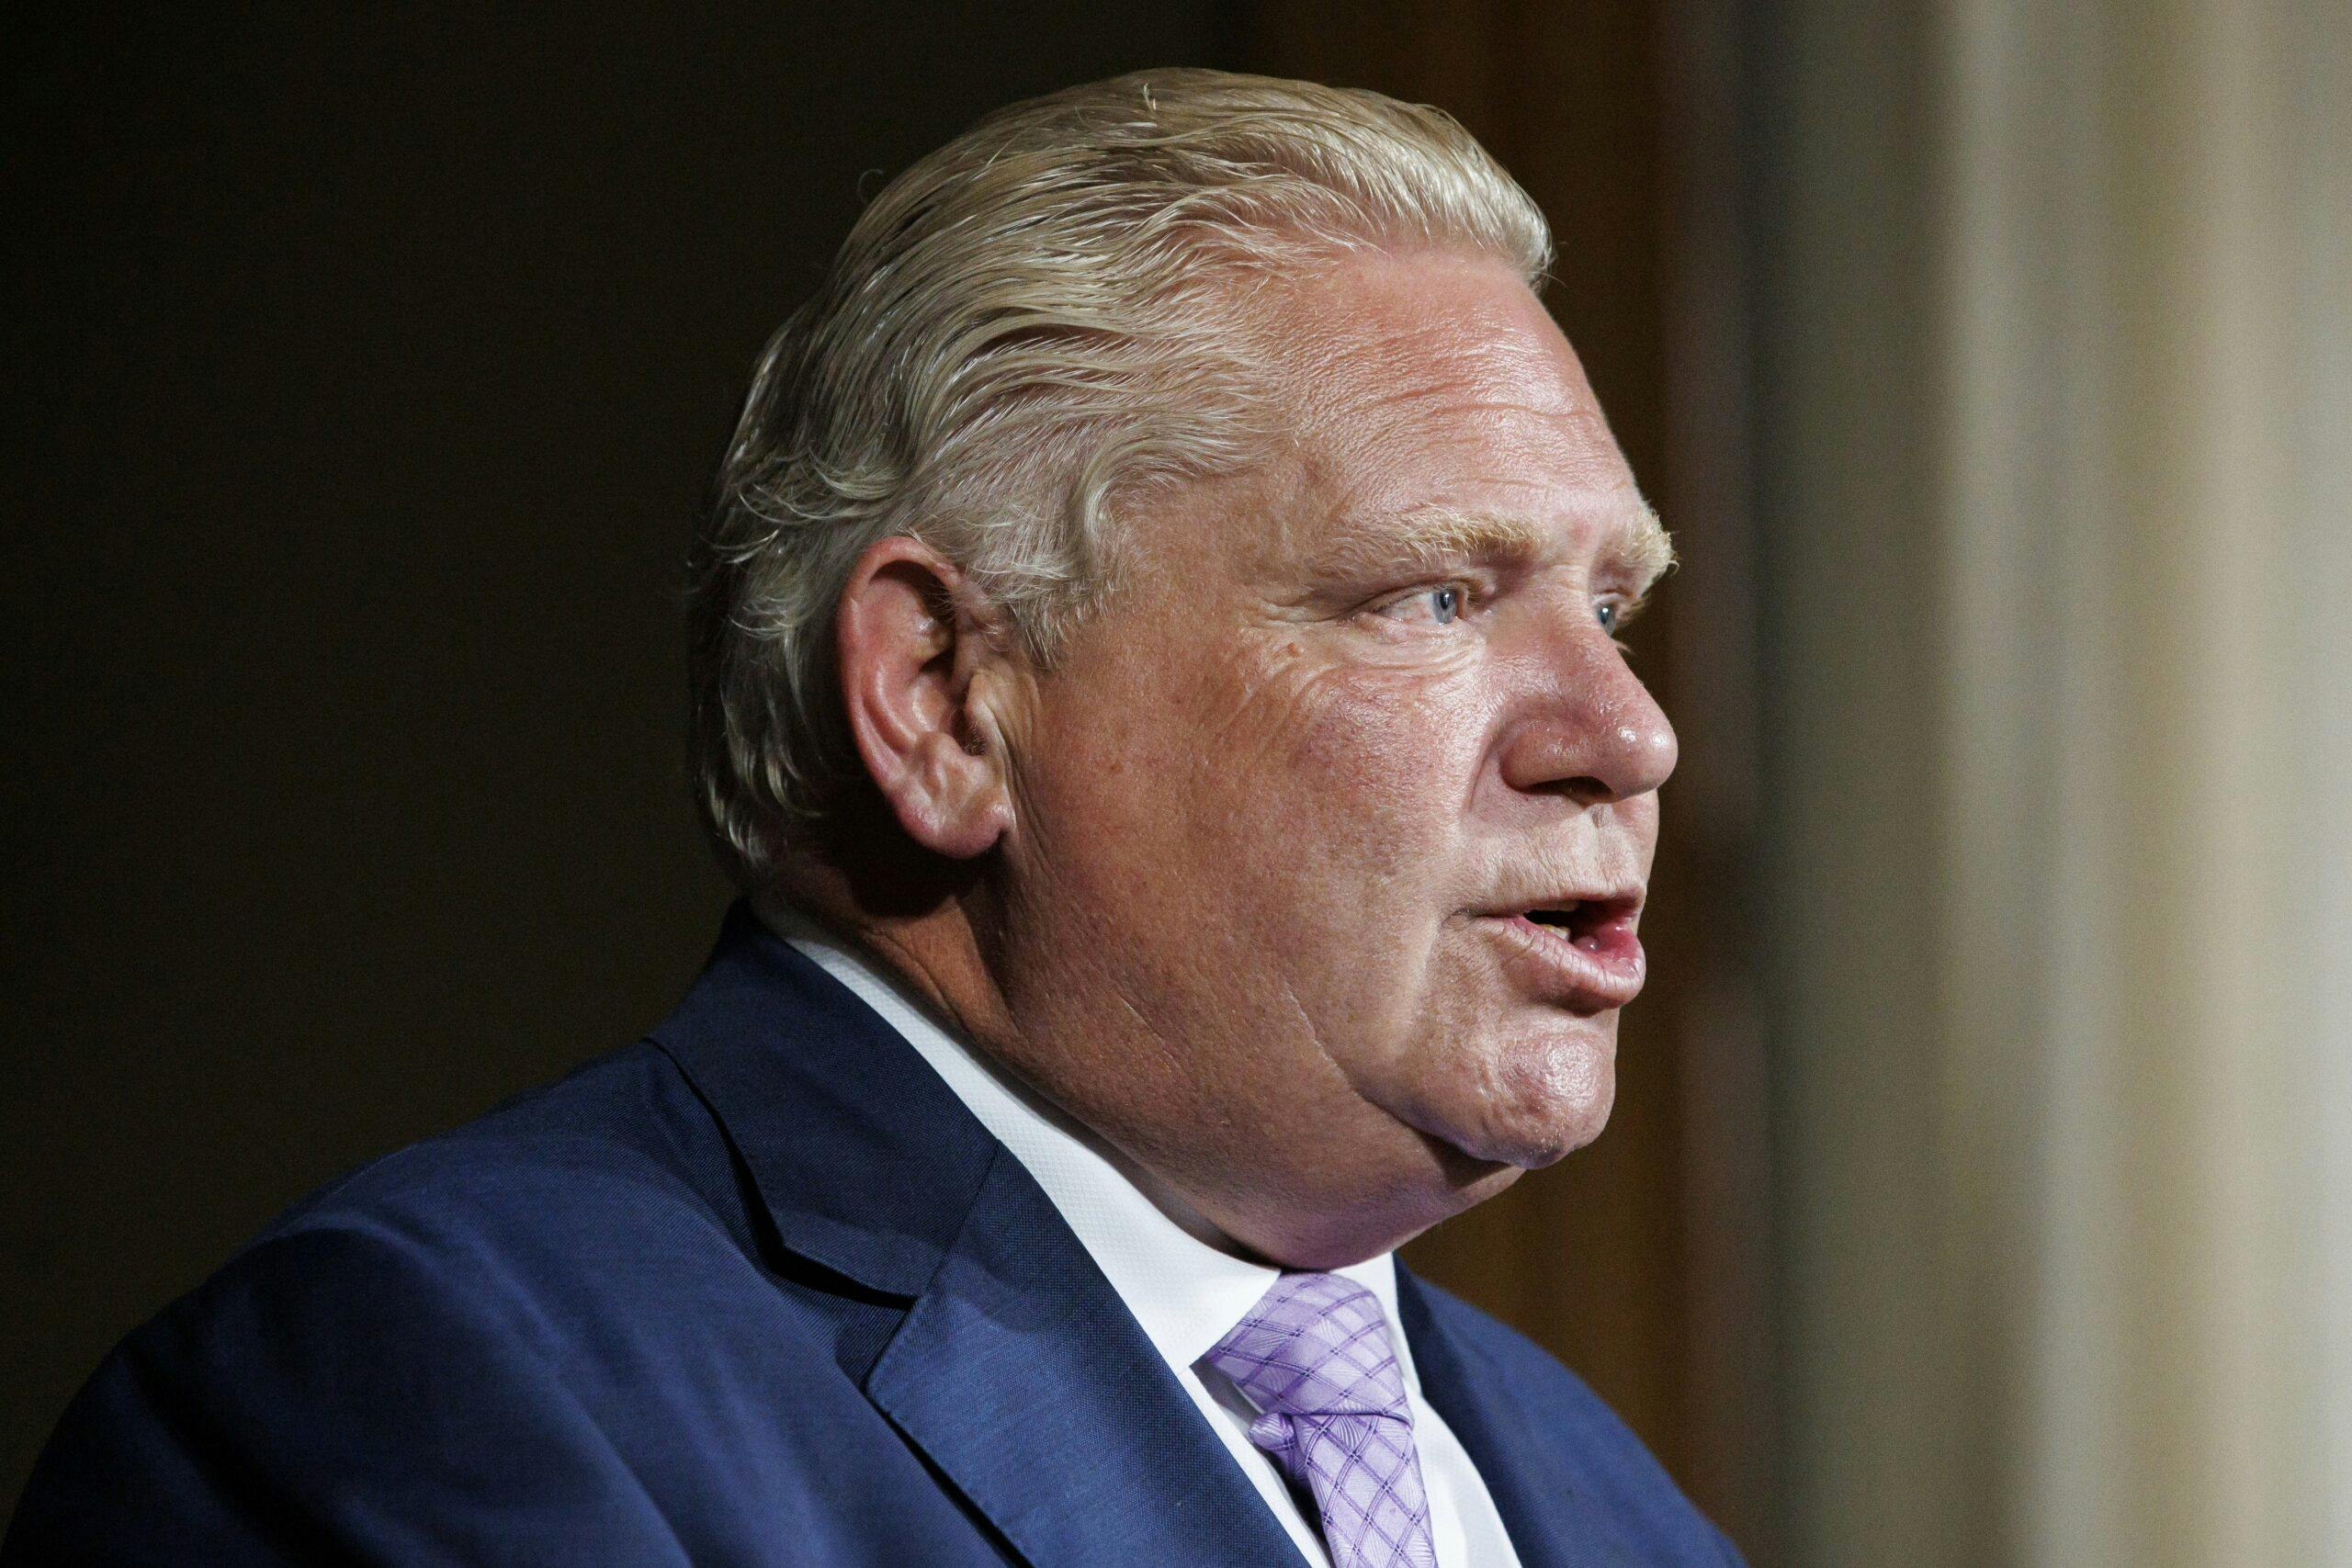 No fast fix coming for Ontario’s inundated hospitals: Ford